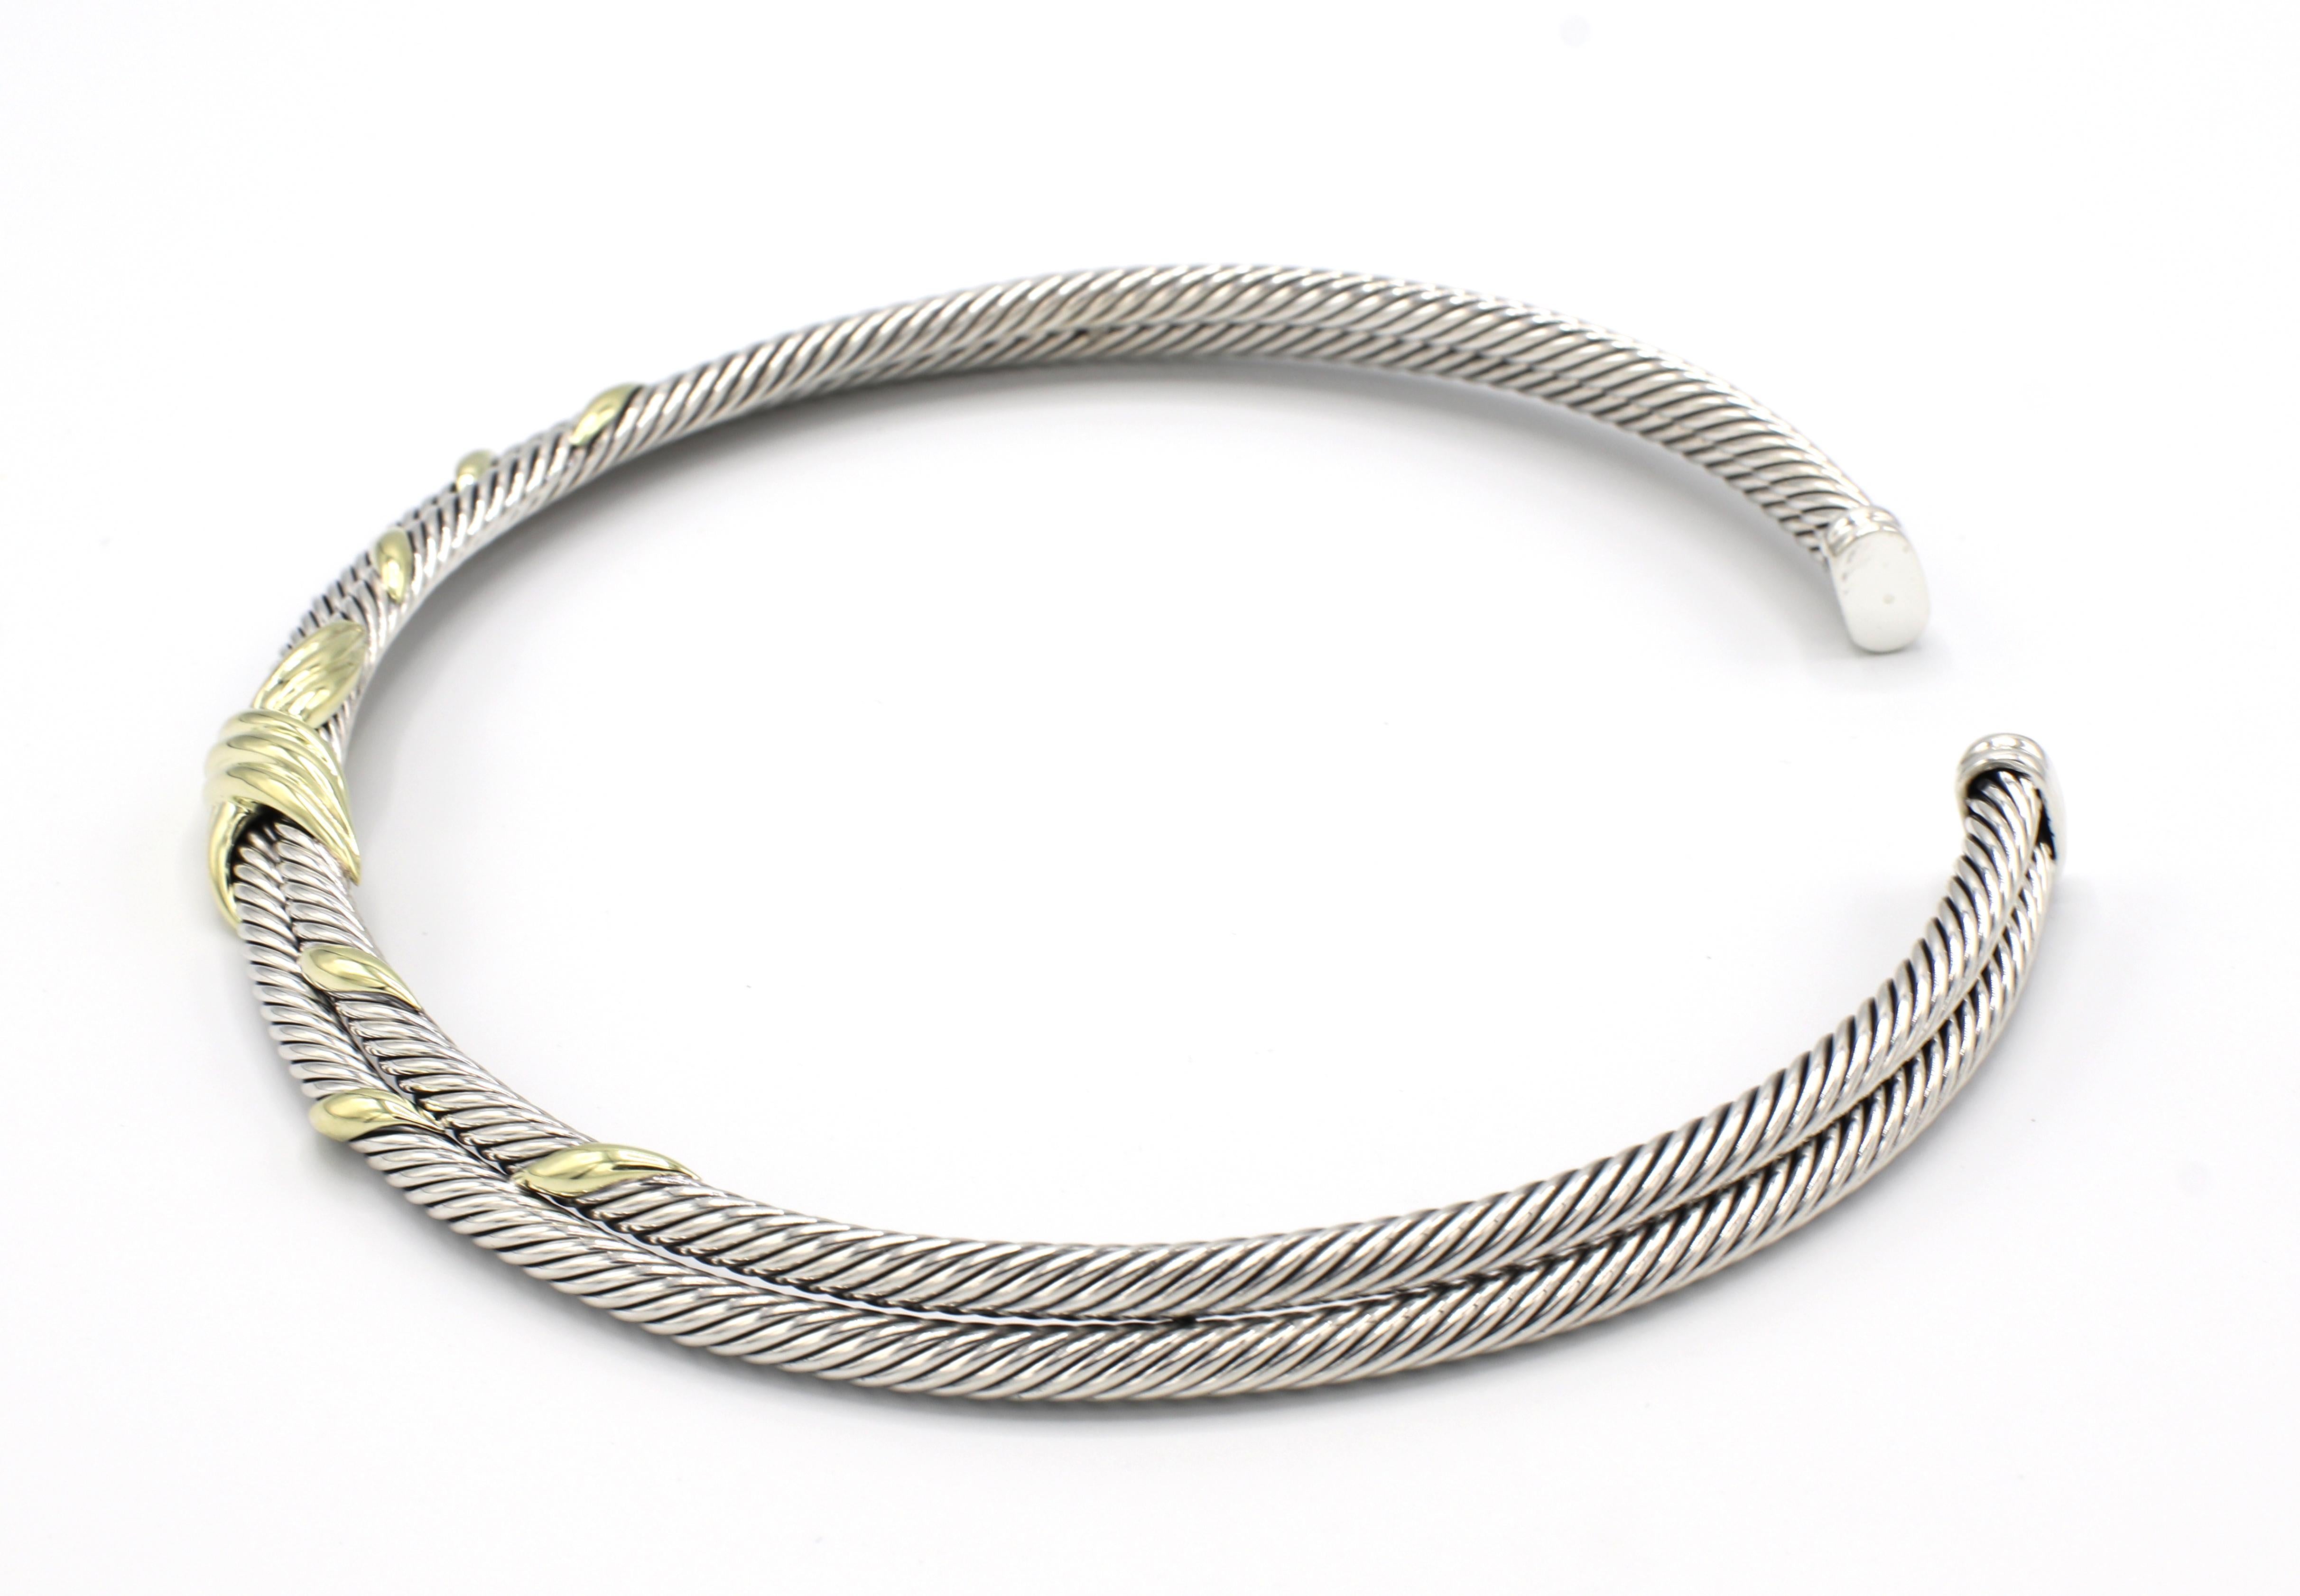 David Yurman Sterling Silver & 14K Gold X Double Cable Choker Collar Necklace
Metal: Sterling silver 925 & 14k yellow gold
Weight: 99.8 grams
Width: 10MM
Length: 14.5 inches
Signed: D. YURMAN 14K 925 
Flexible/adjustable 